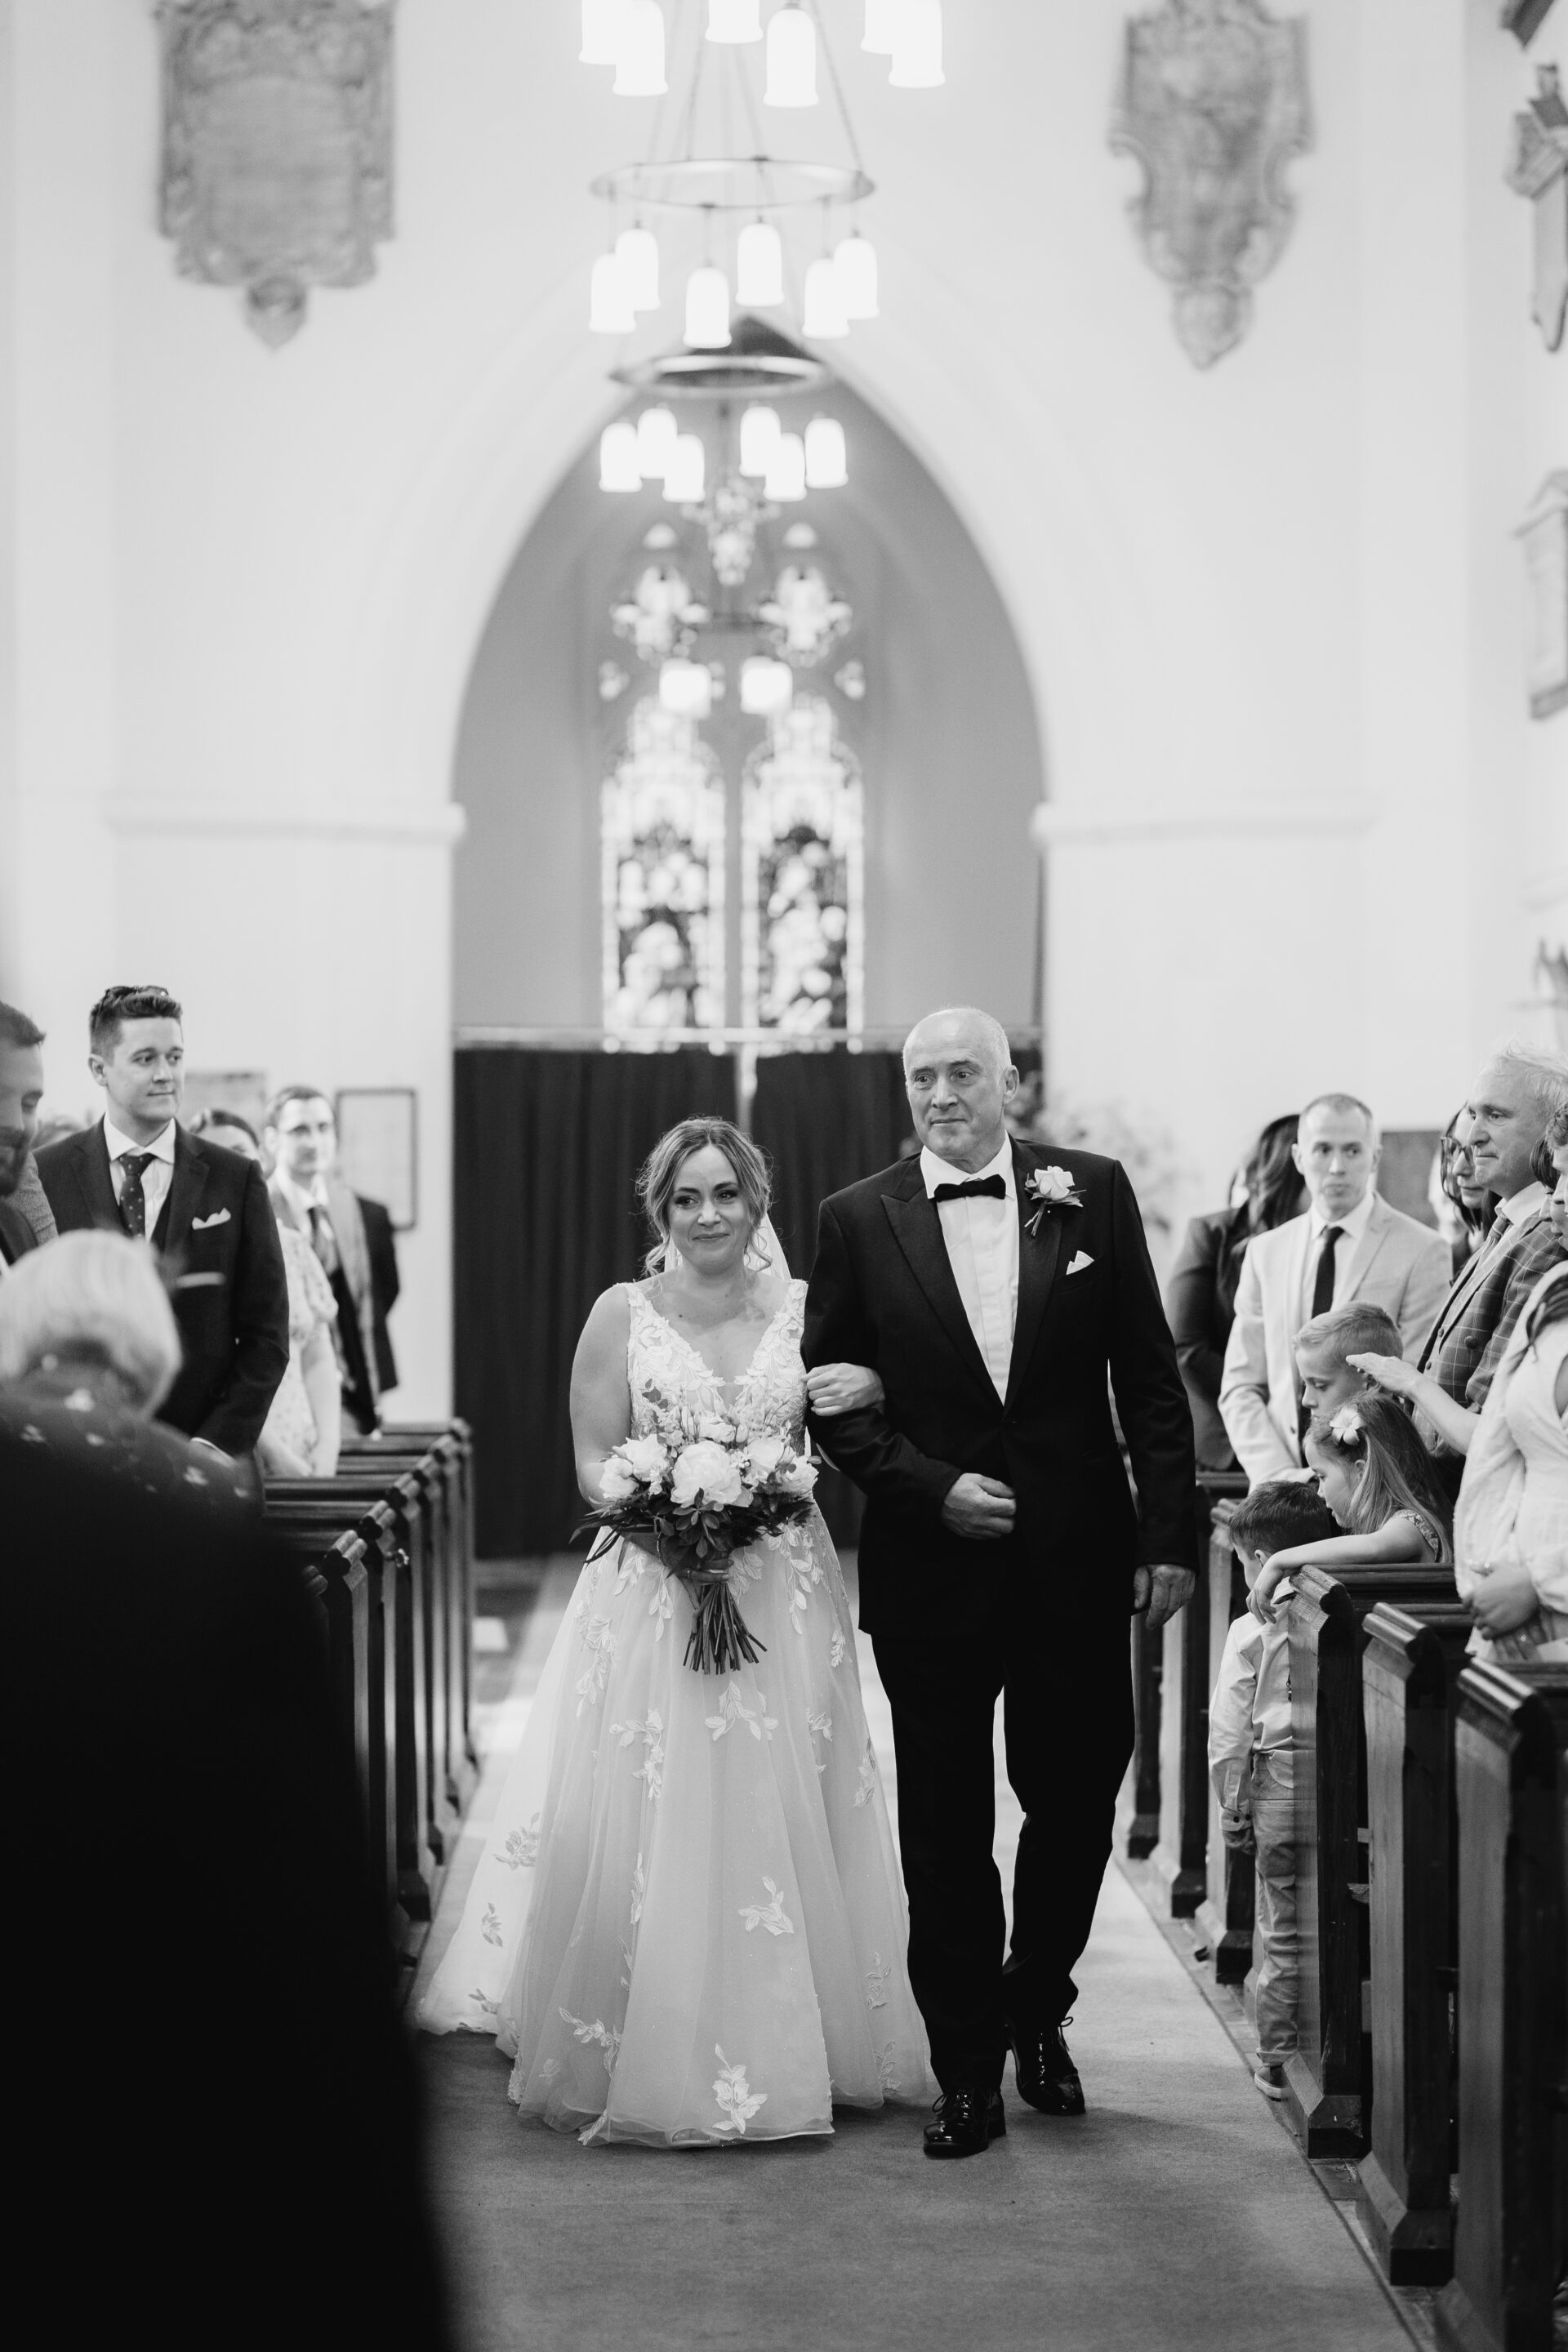 The bride and her father walk down the aisle